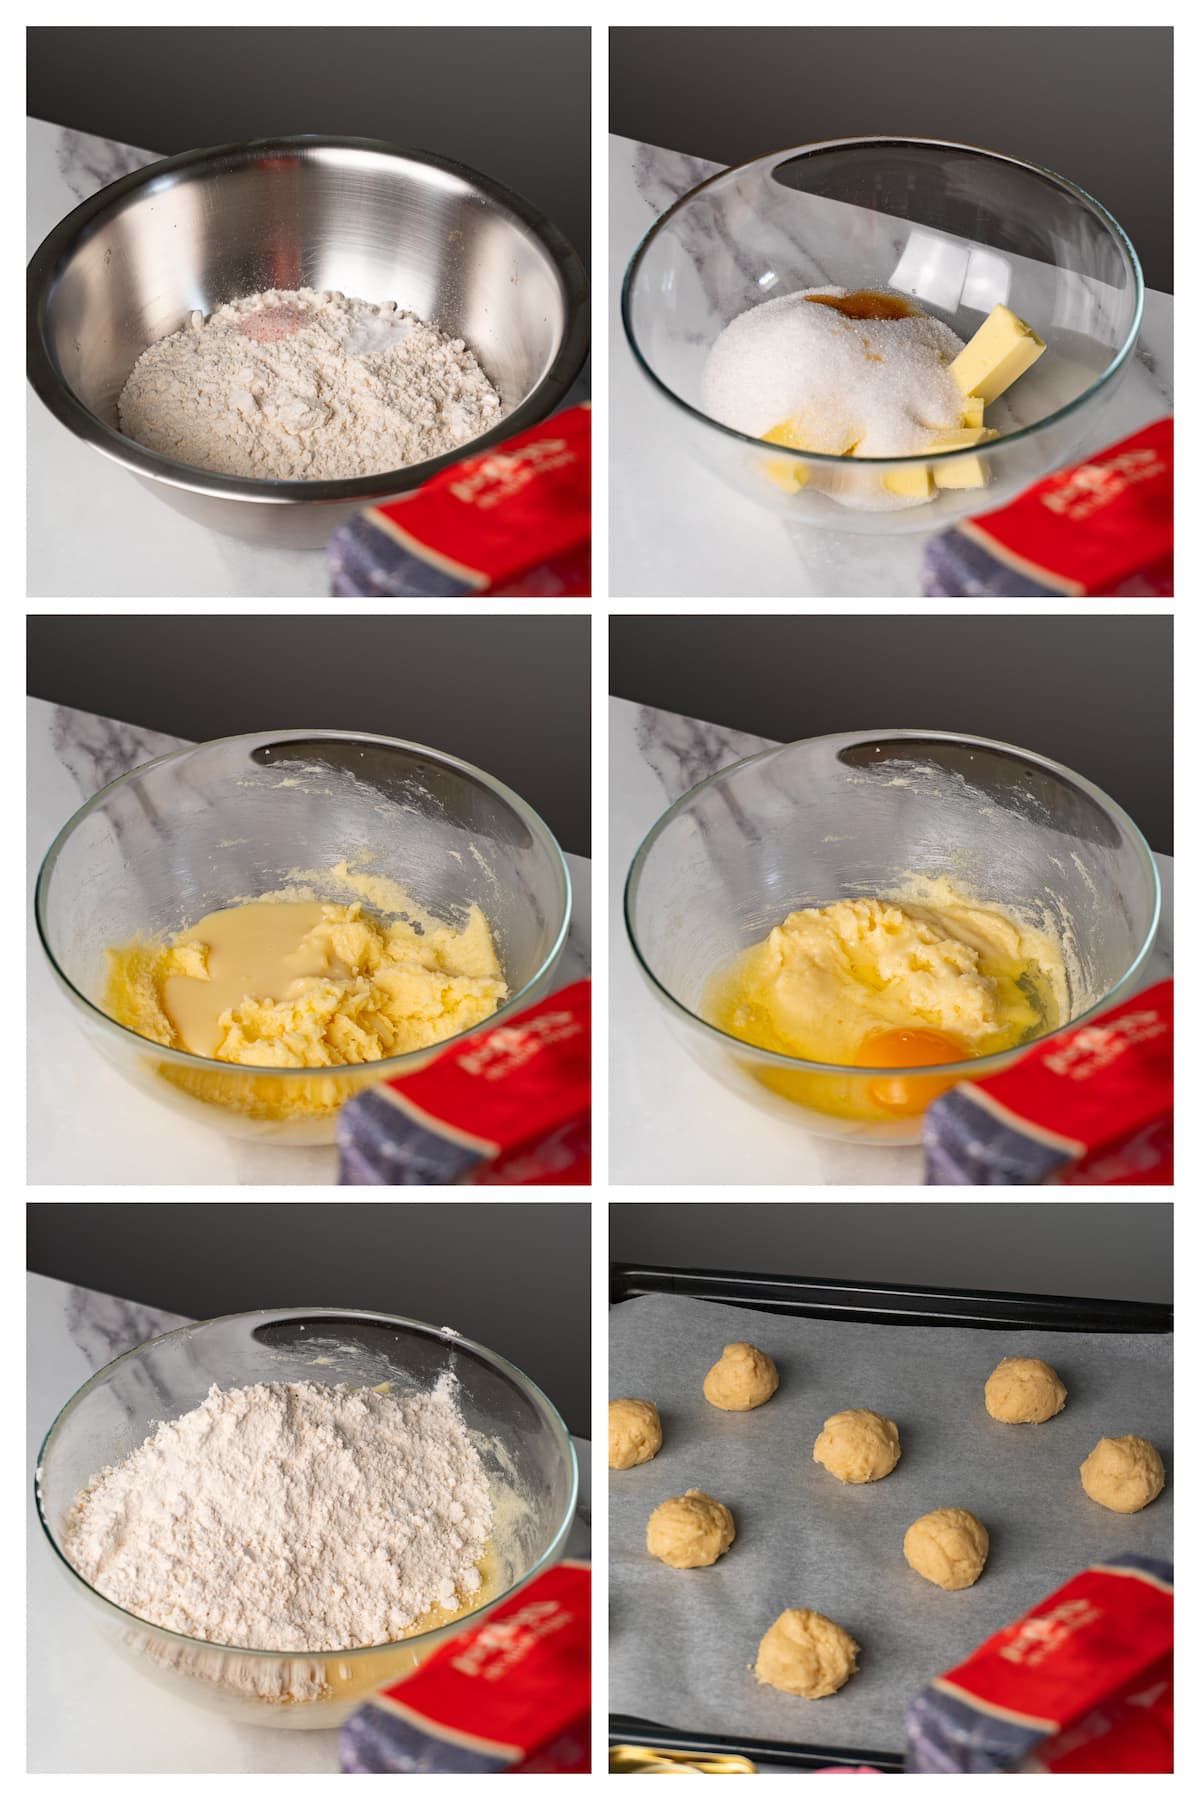 A collage image shows how to make condensed milk cookies in six steps.